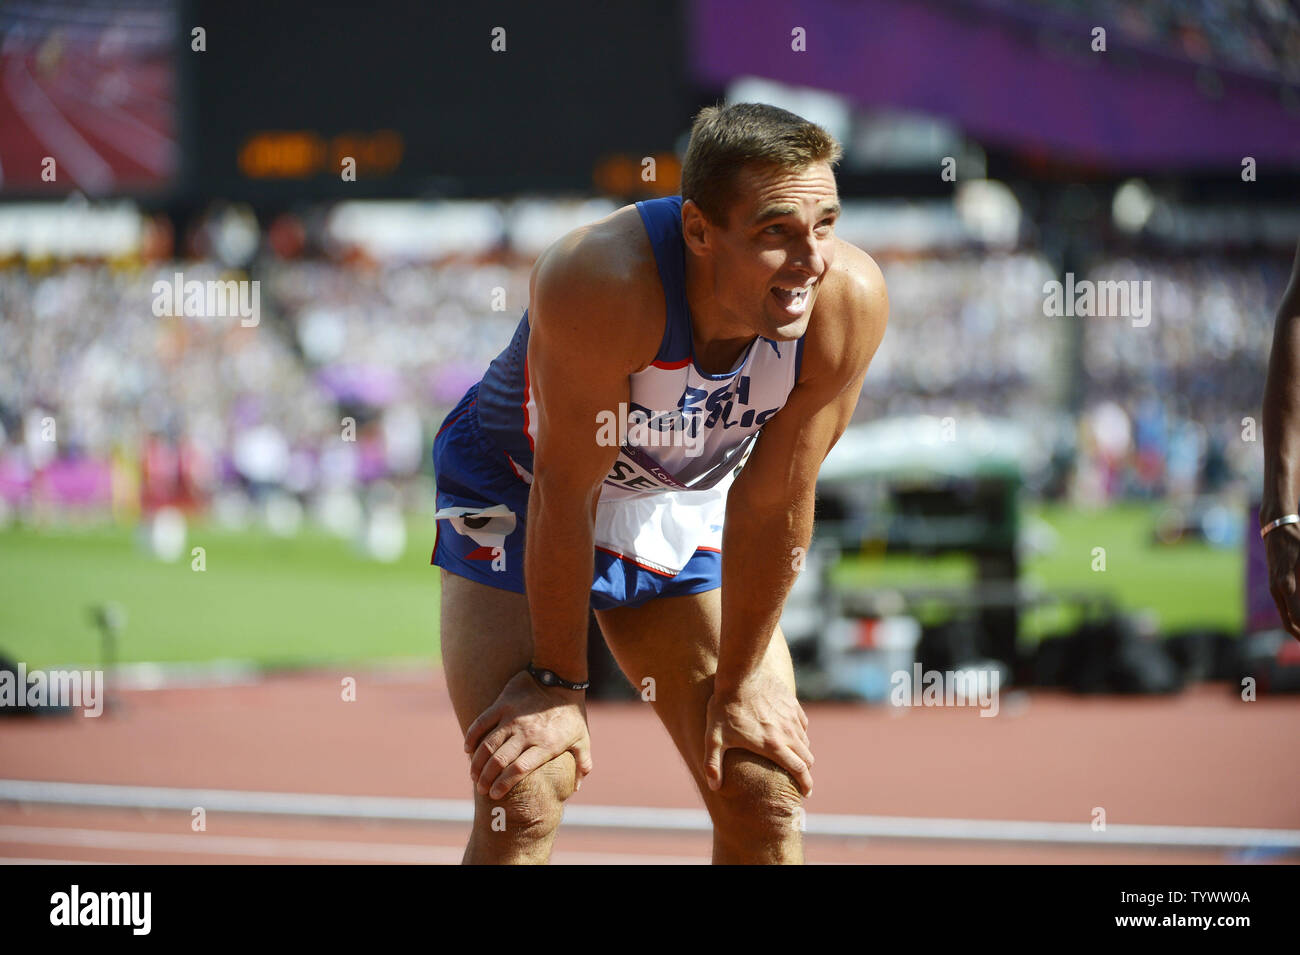 czech athlete a former world record holder in the decathlon